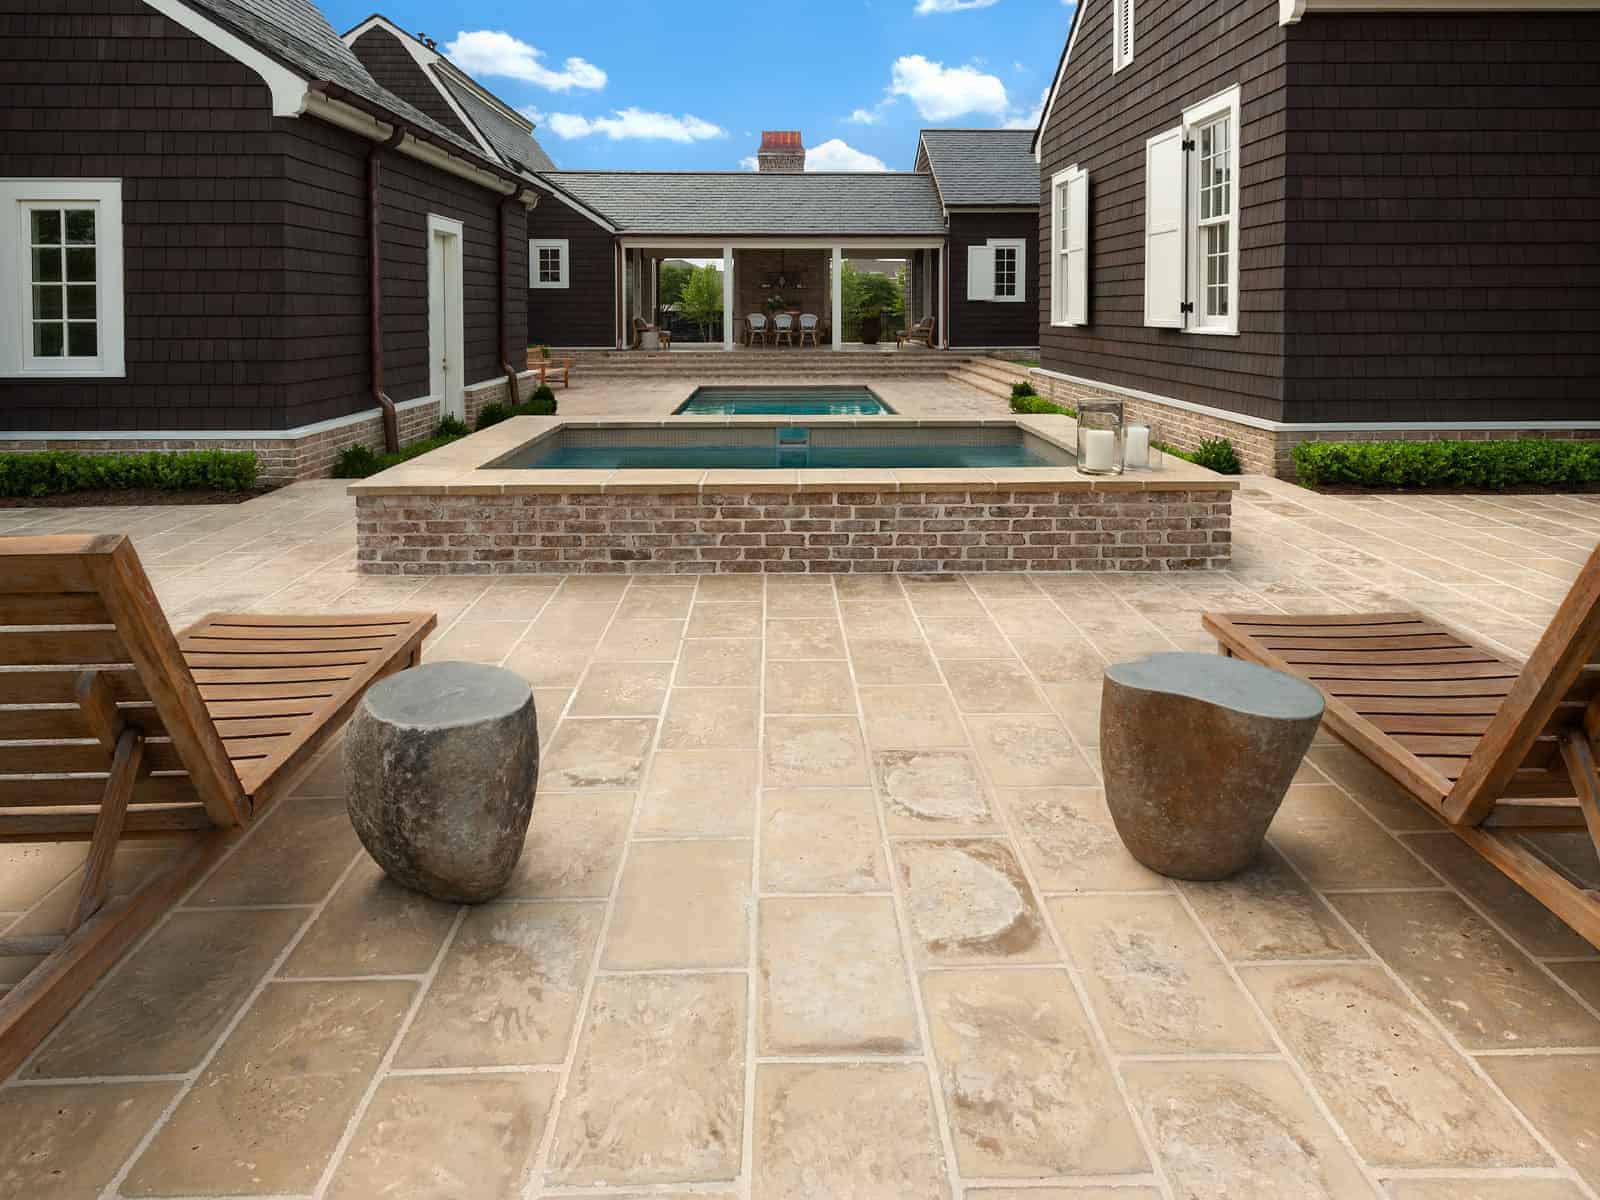 How To Style Your Swimming Pool With Concrete Pavers | Peacock Pavers